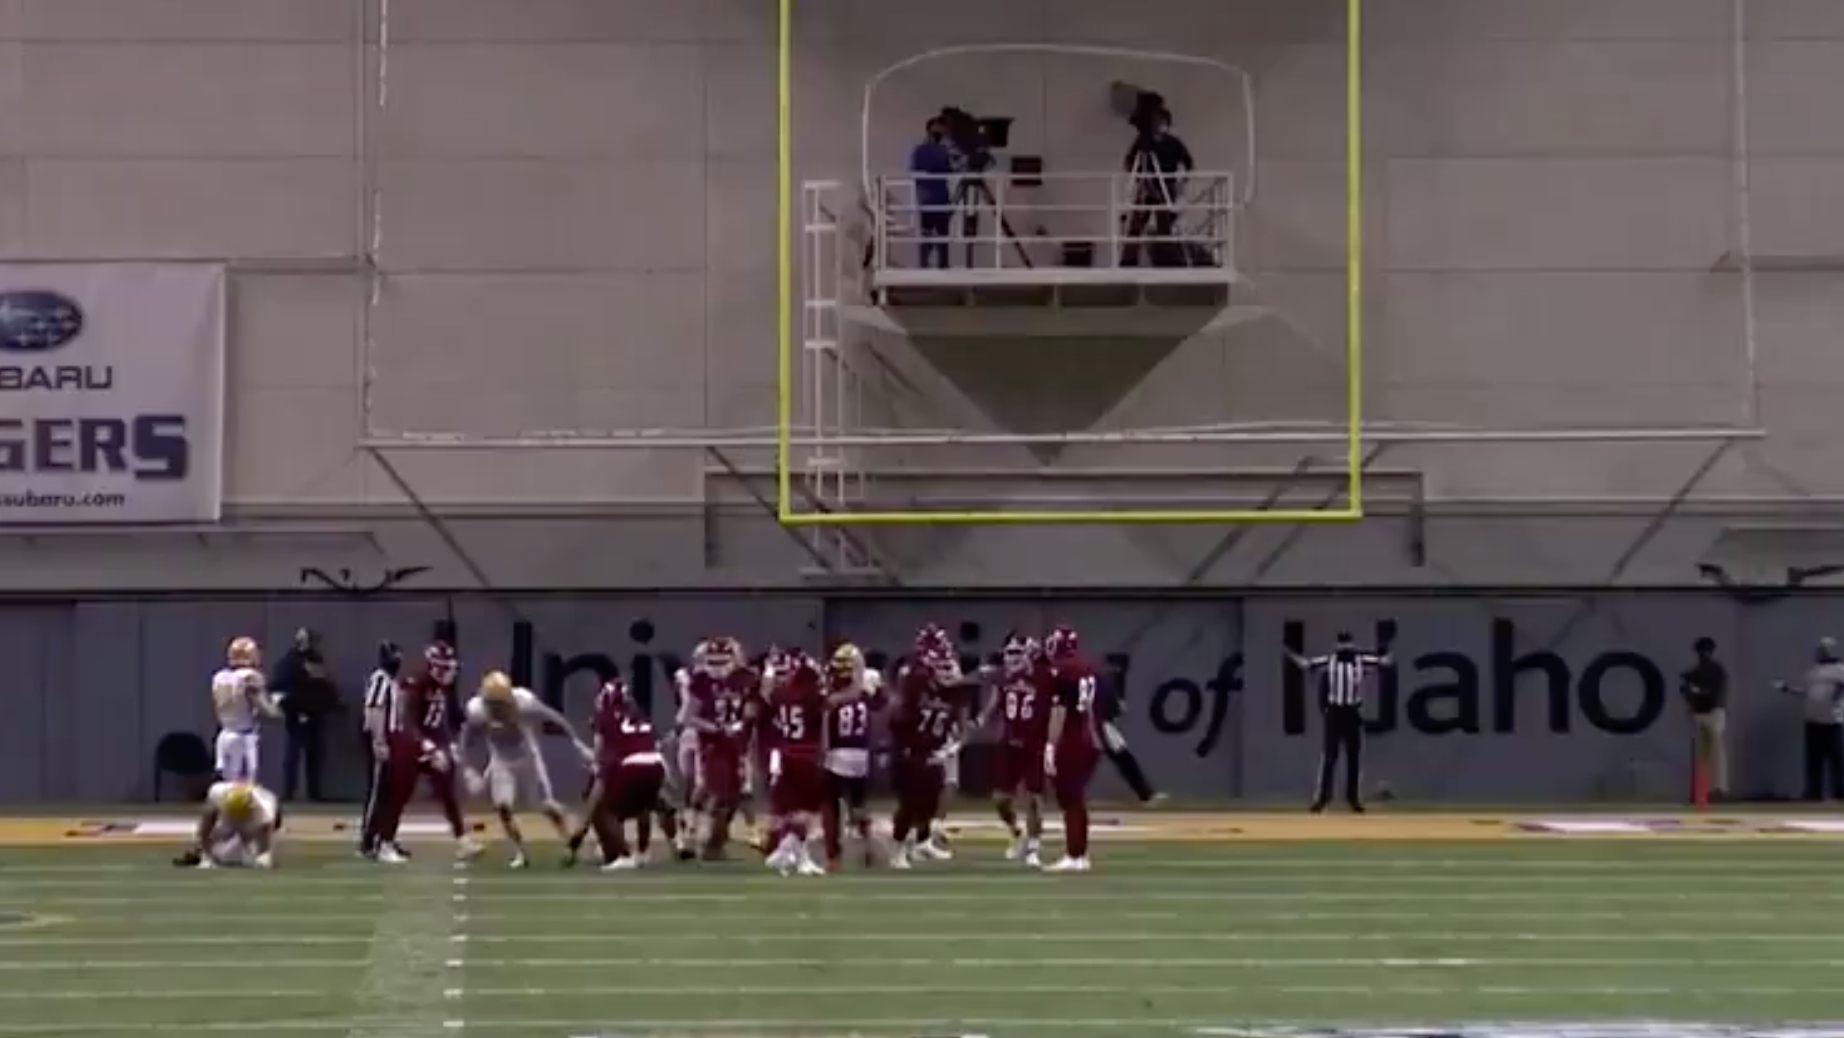 Critical arbitration made called field goal in the FCS game (watch)